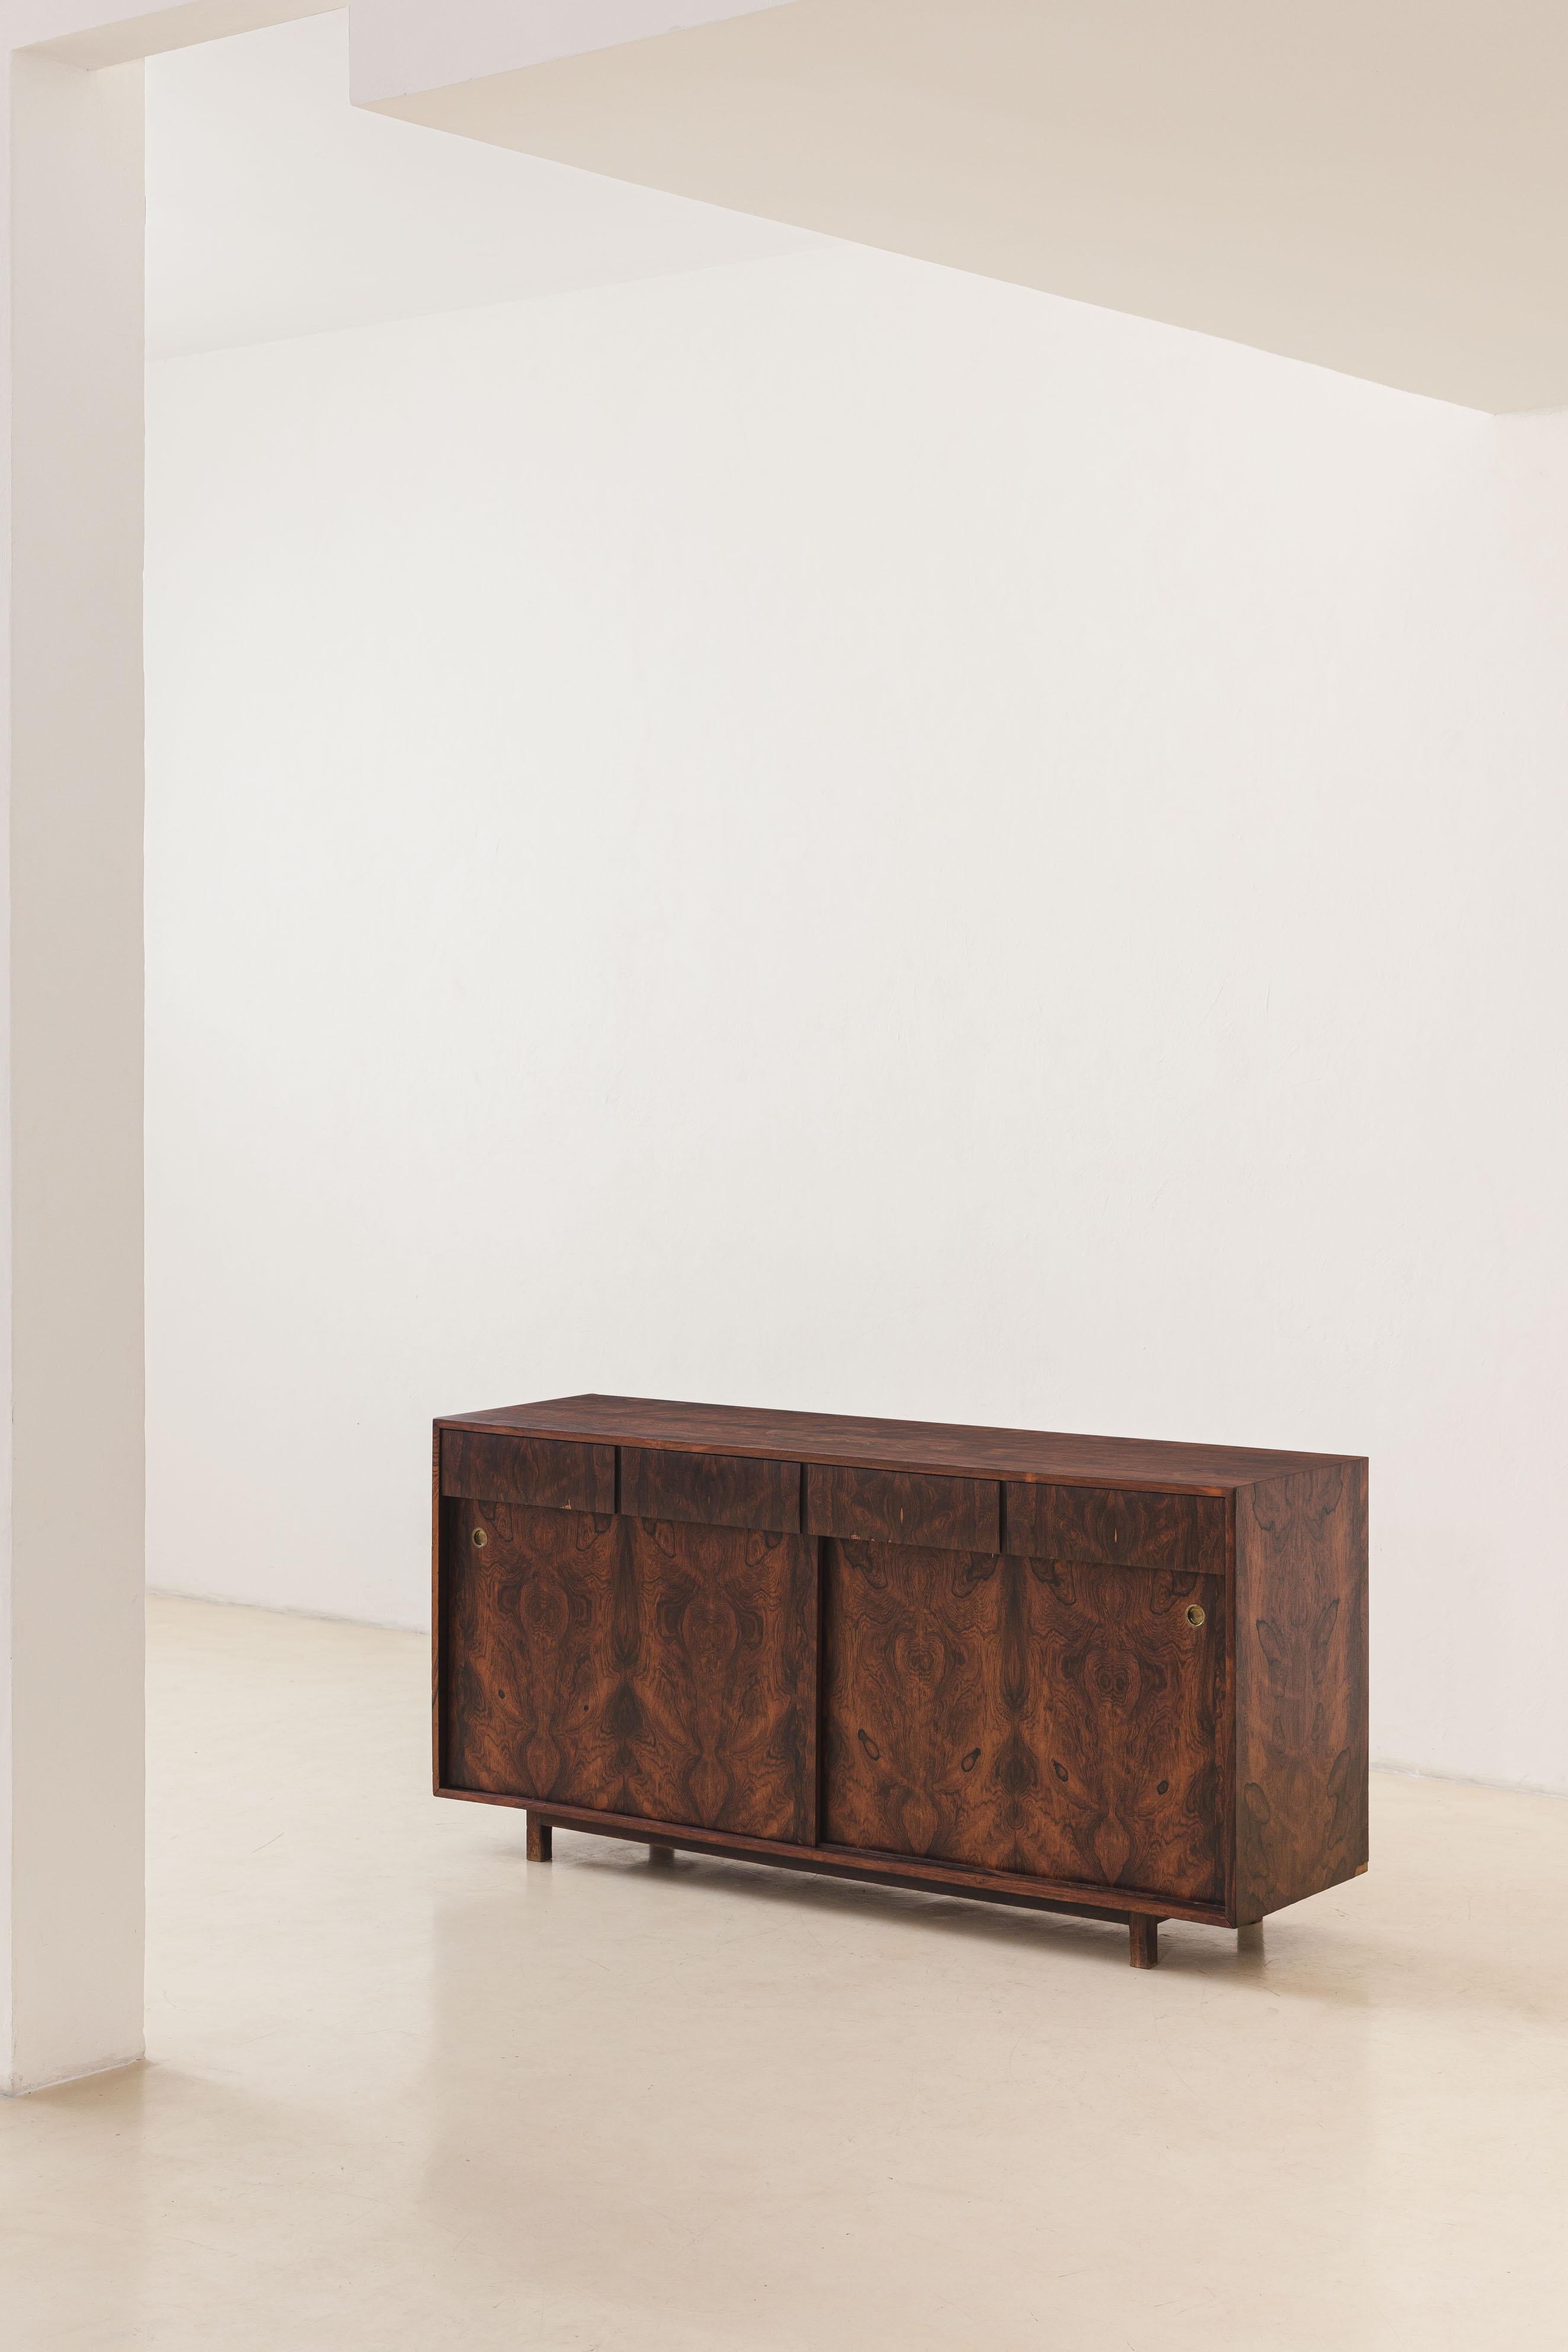 Imbuia Credenza by Celina Decorações, Brazilian Midcentury Design, 1960s In Good Condition For Sale In New York, NY